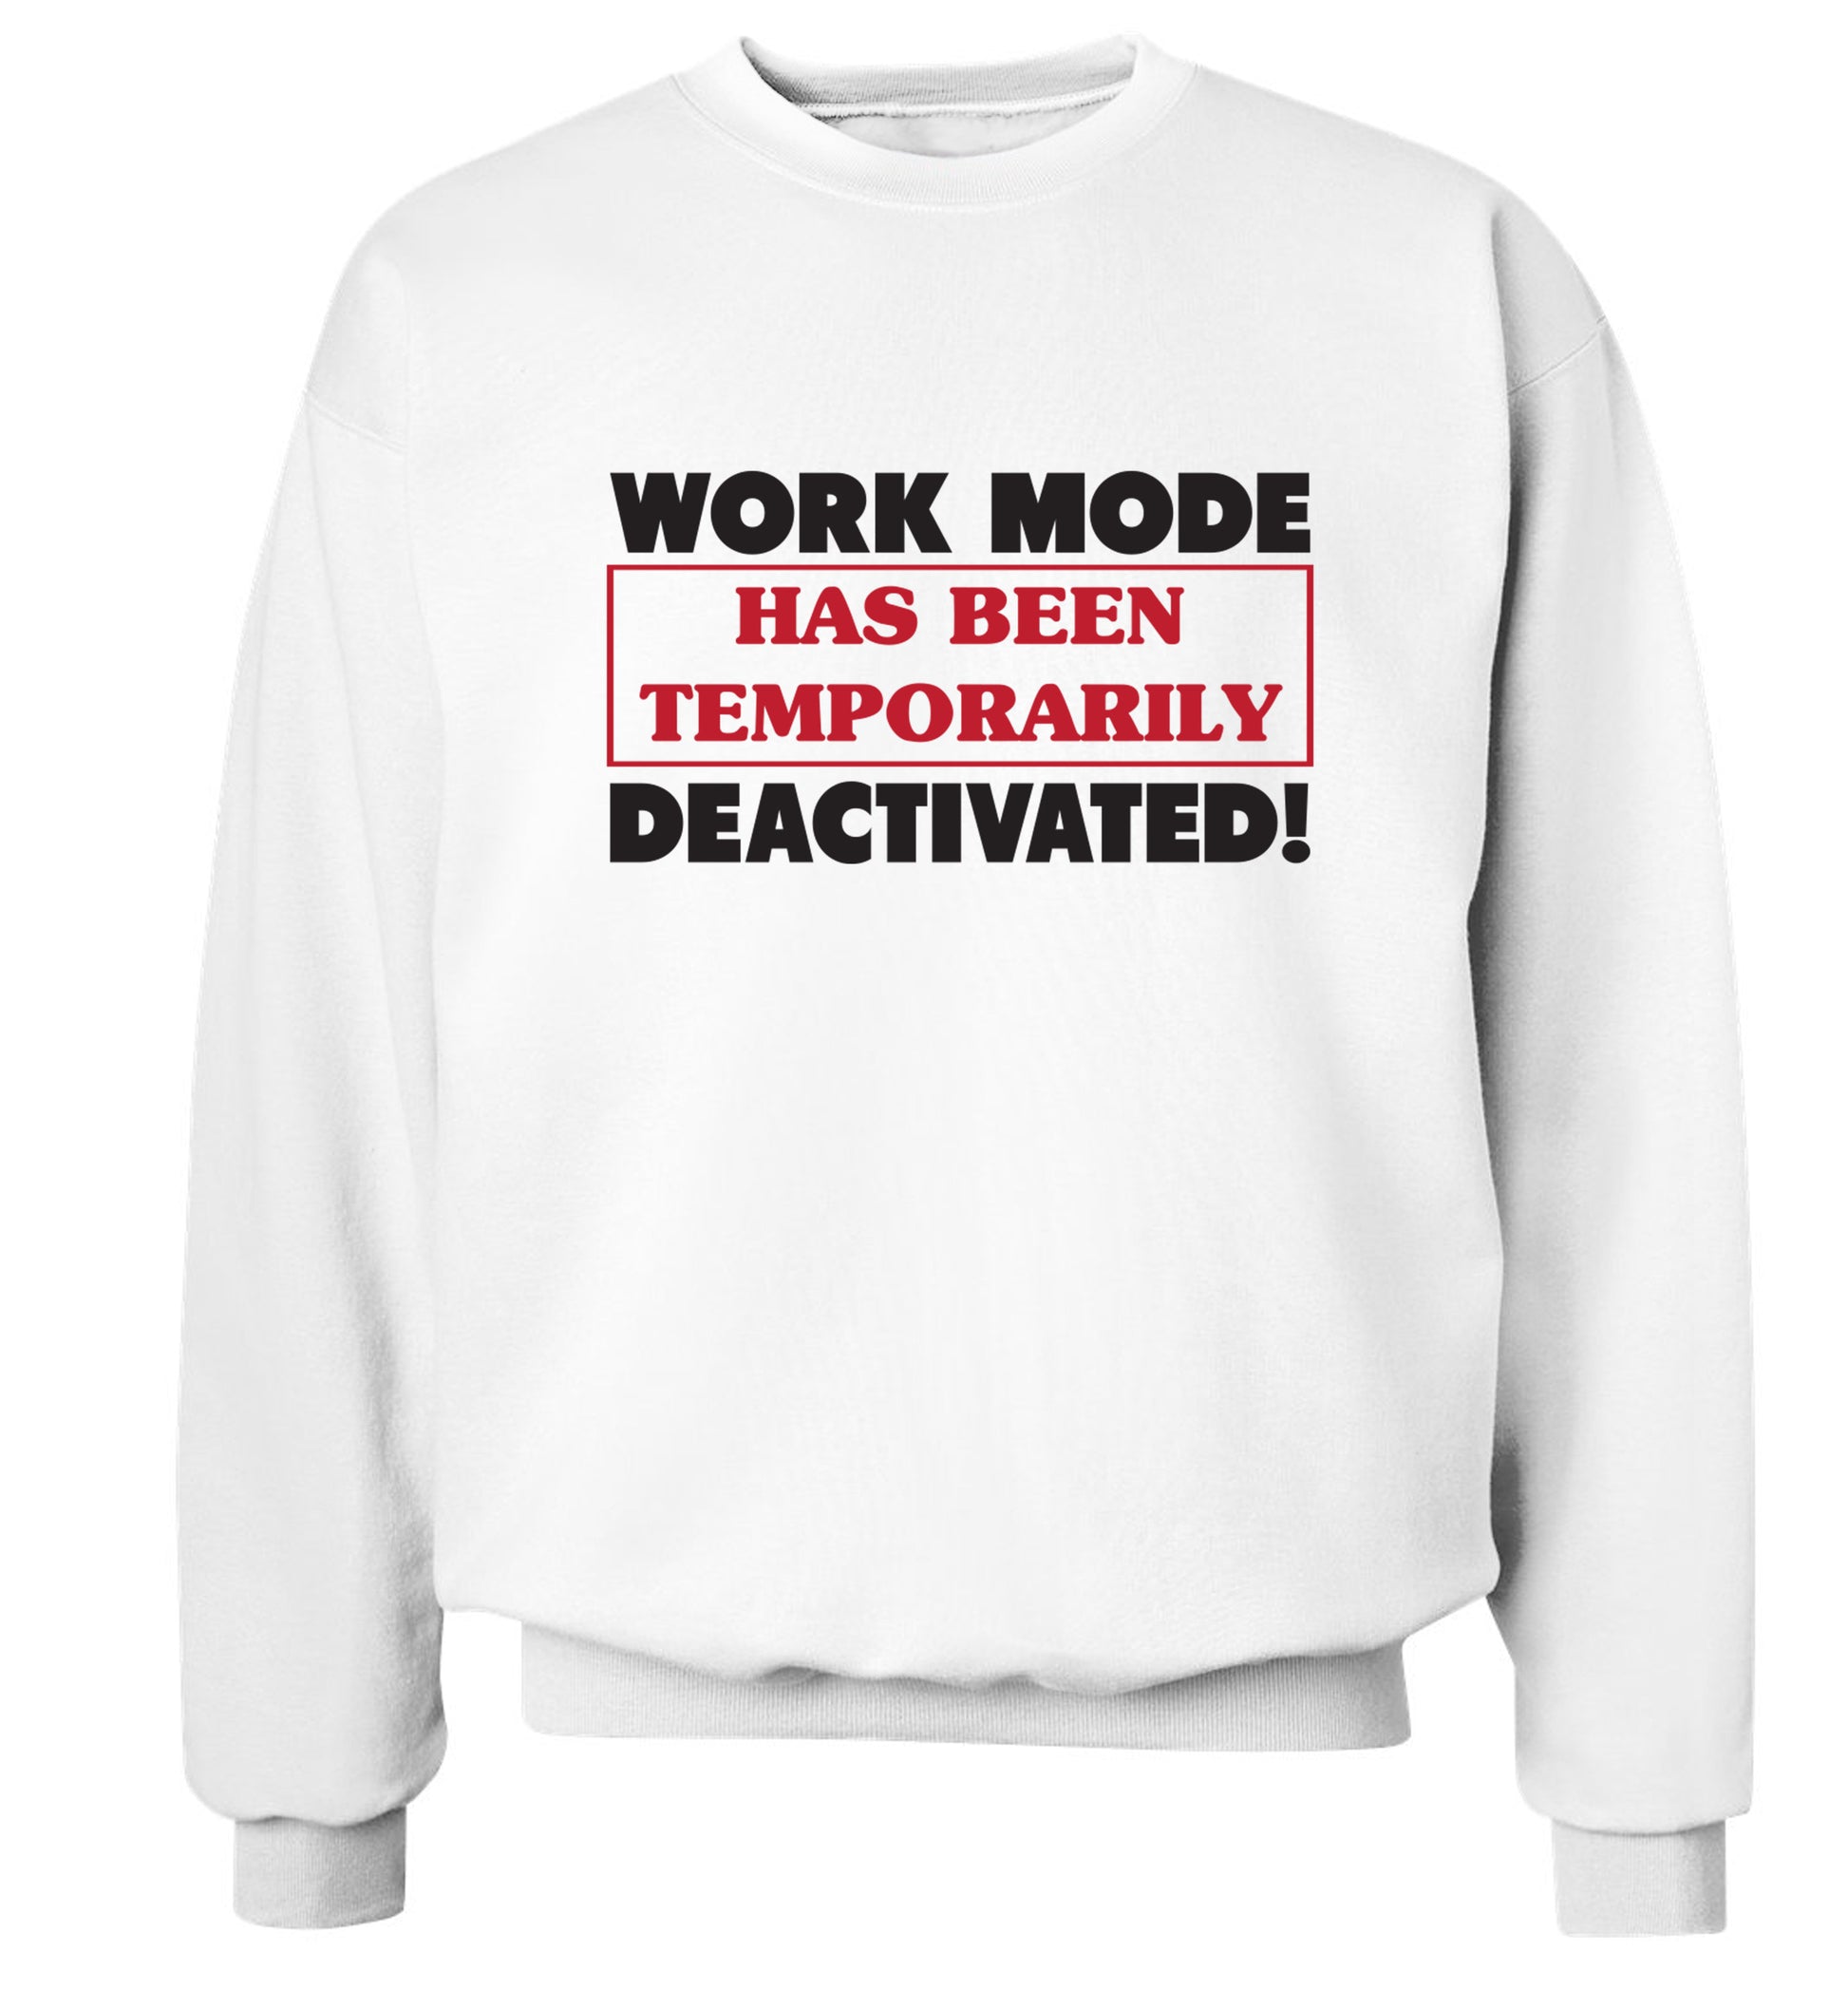 Work mode has now been temporarily deactivated Adult's unisex white Sweater 2XL